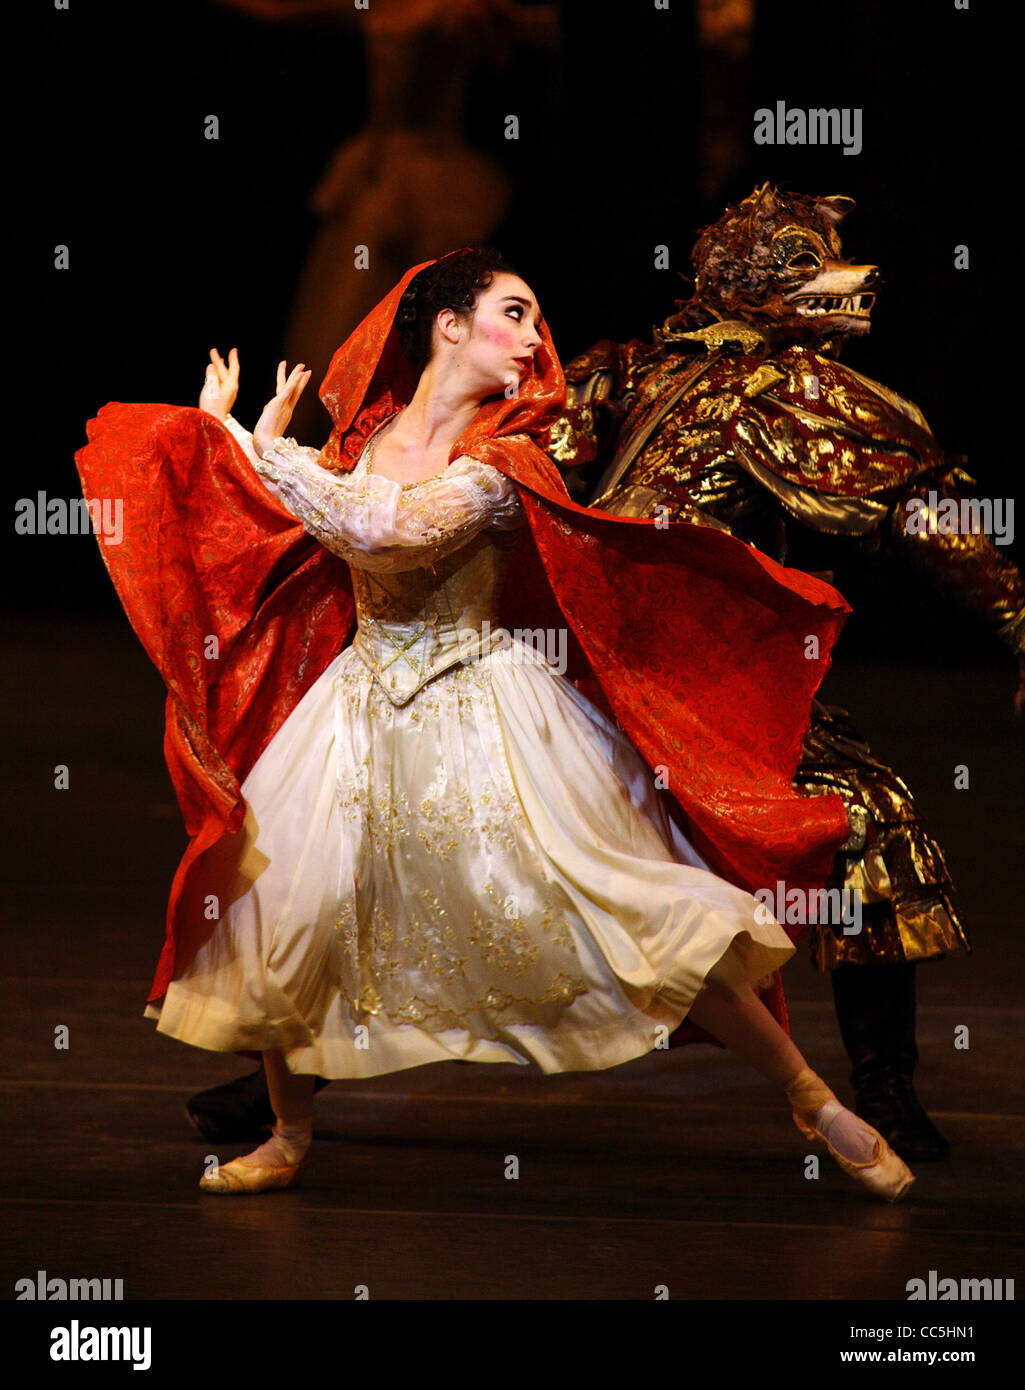 Ballet dancers performing Little Red Riding Hood story, Beijing, China Stock Photo